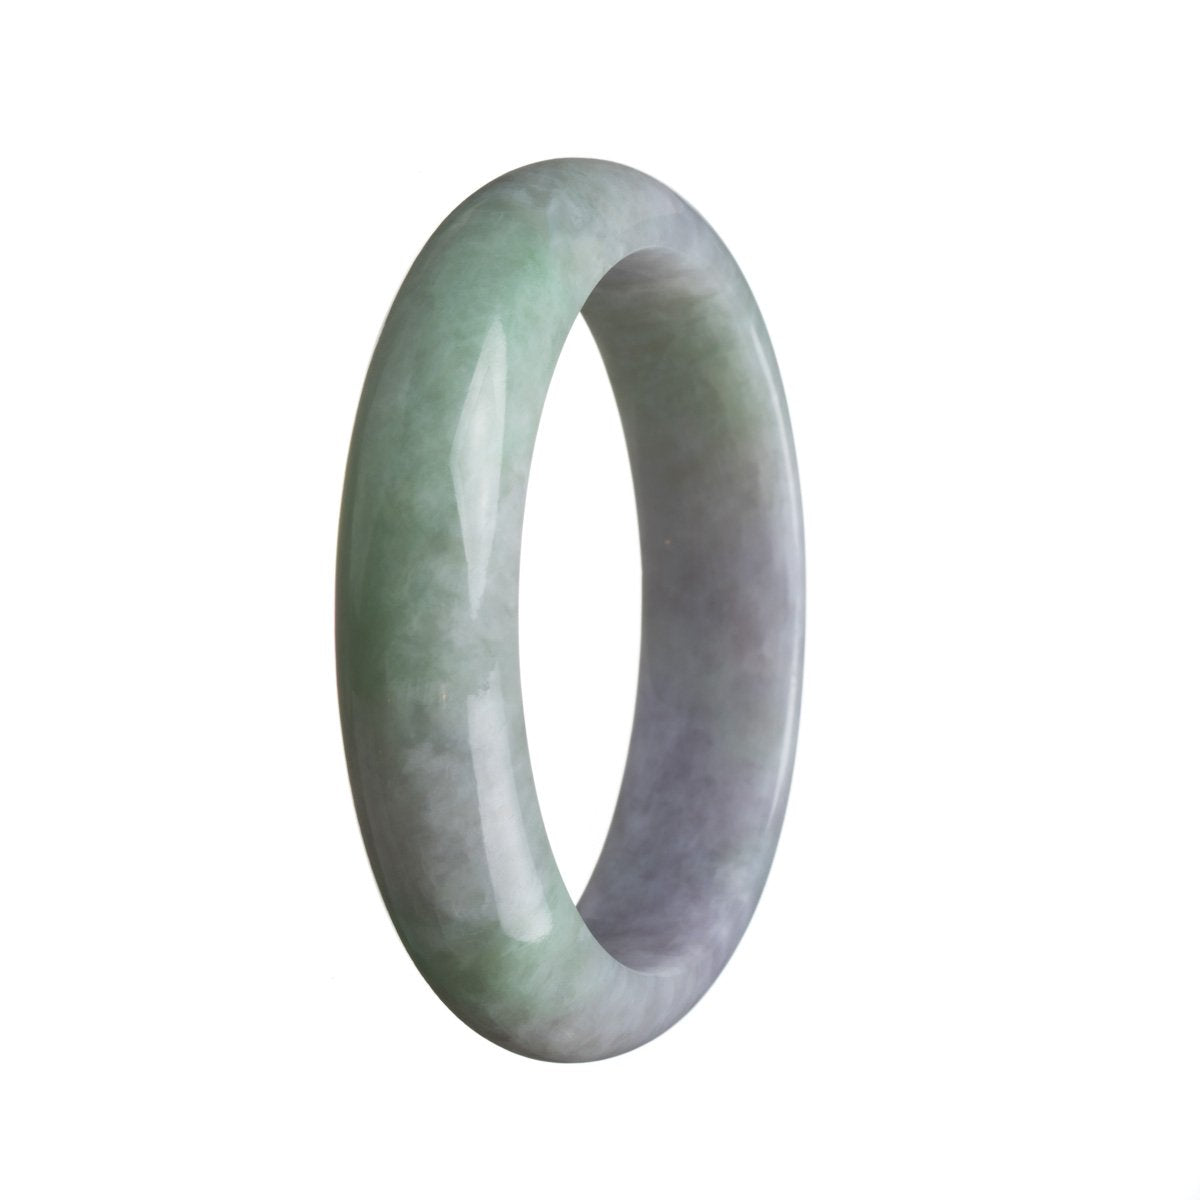 A beautiful jade bangle bracelet in a half moon shape, featuring genuine Type A Green with lavender Burmese Jade. The bracelet has a diameter of 58mm and is a stunning piece from MAYS GEMS.